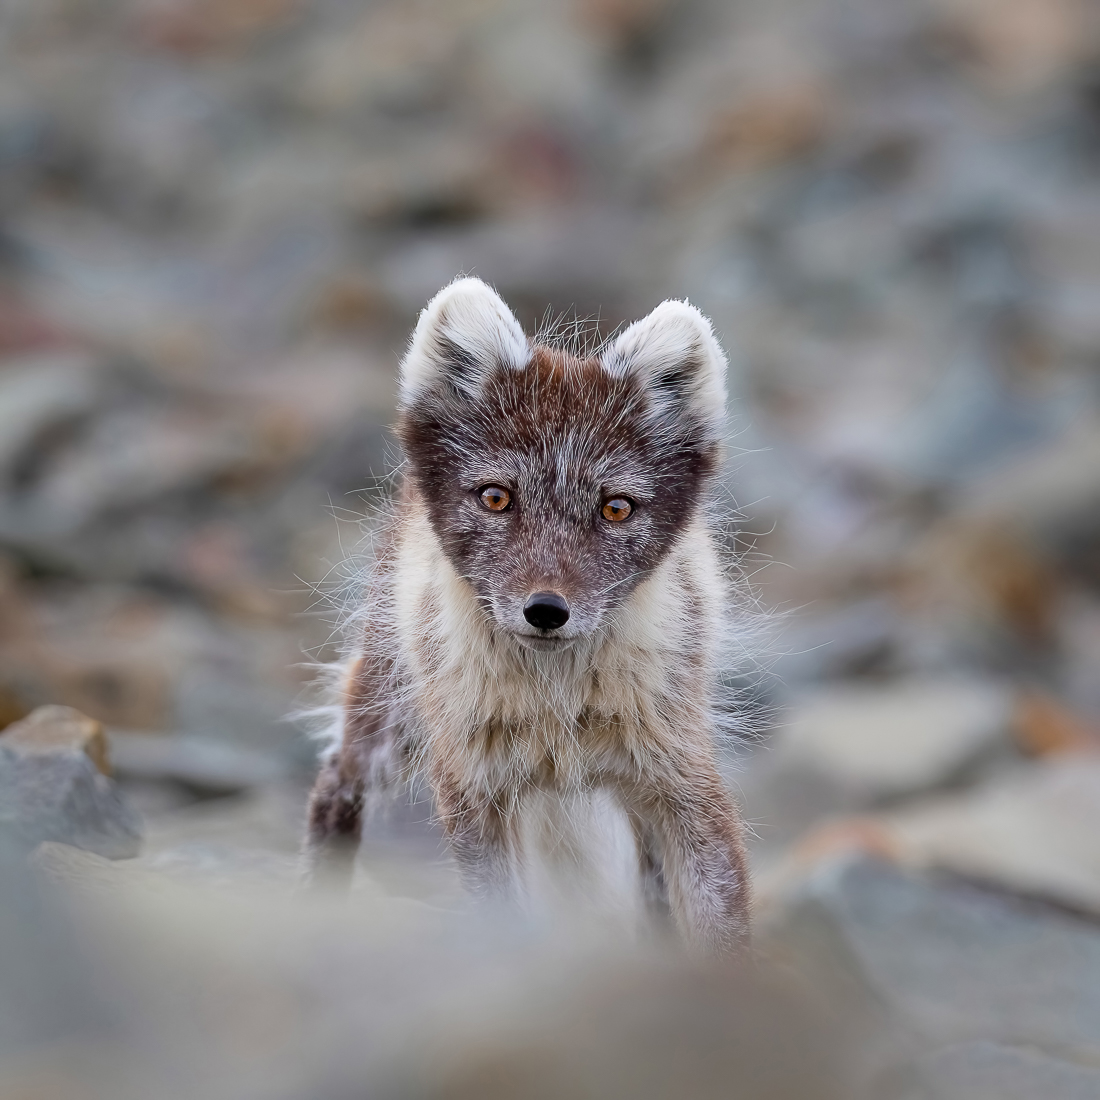 Eye to eye with arctic foxes